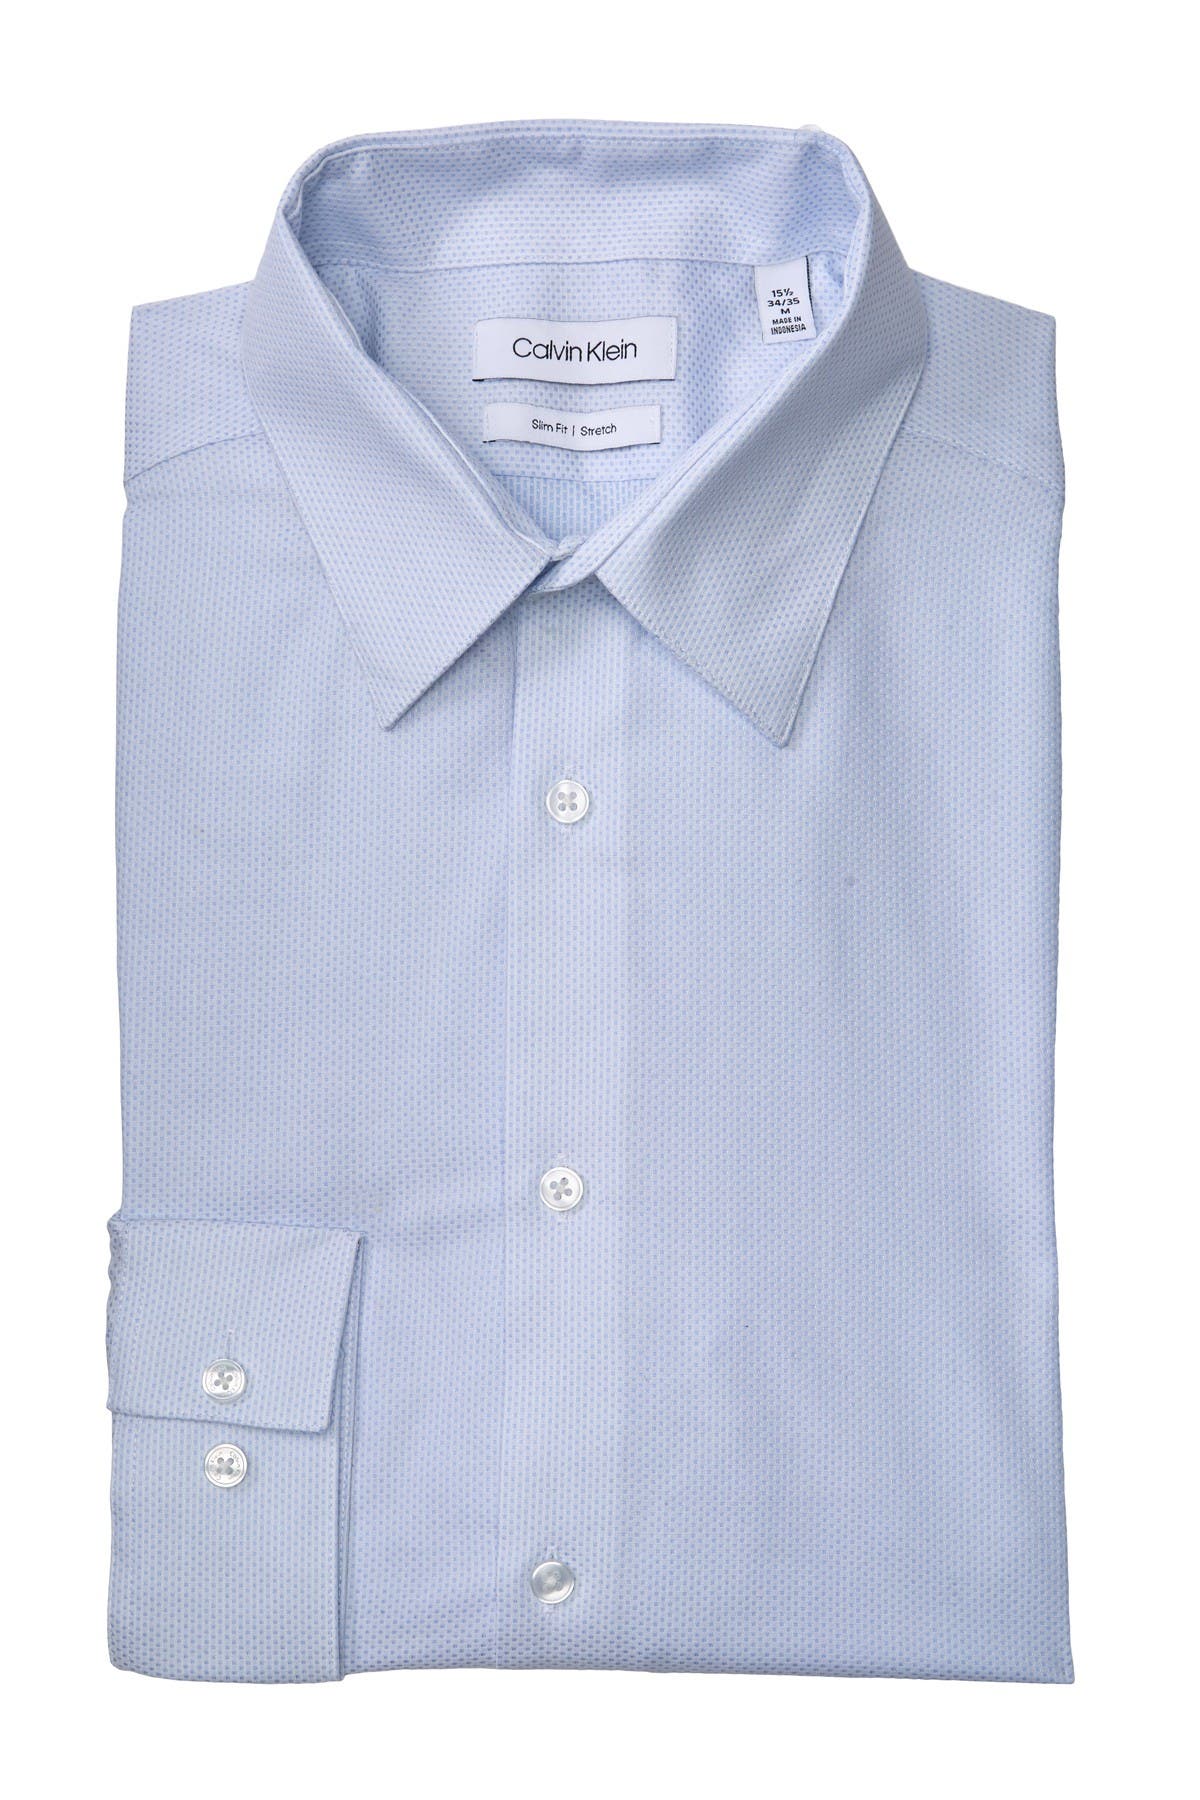 Nordstrom Rack Non-Iron Mens 17 36/37 Solid Traditional Fit Blue Dress Shirt